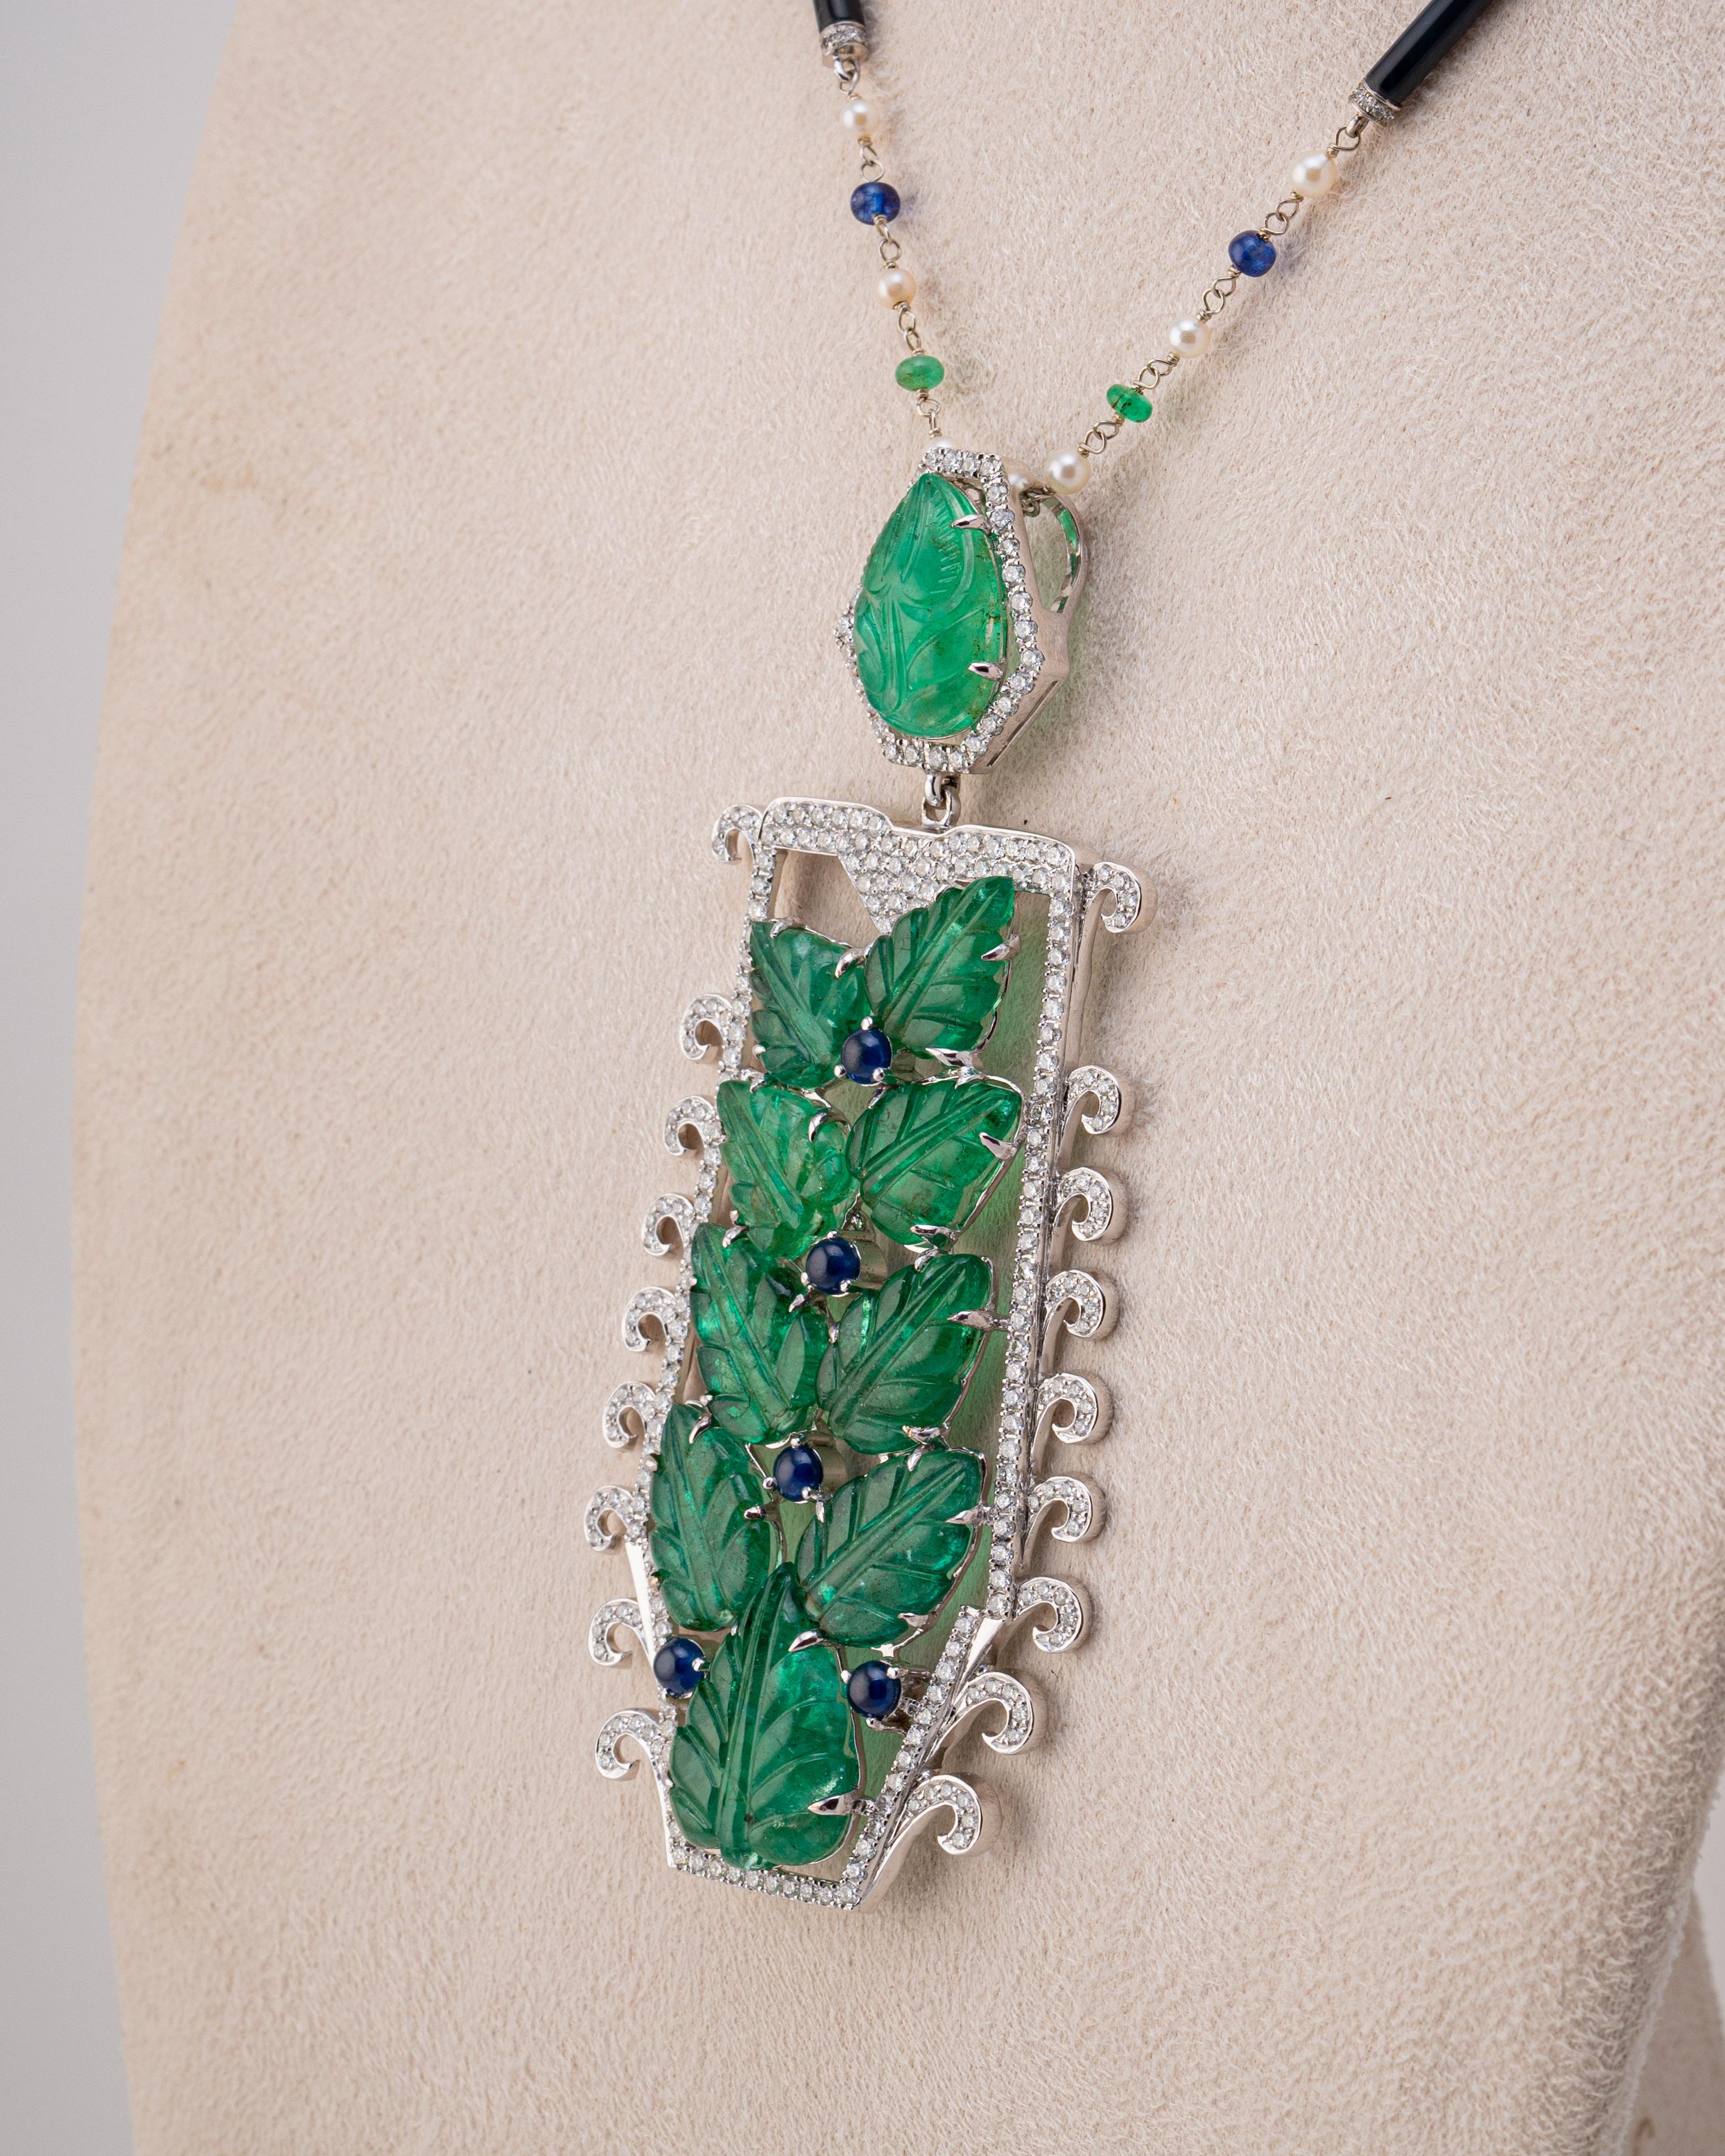 An art-deco looking 53 carat Zambian Emerald, 1.73 carat Blue Sapphire and 4.05 carat White Diamond Pendant Necklace, with a Black Onyx, Pearl, Blue Sapphire and Emerald chain all set in 18K White Gold. the chain is currently 30 inches long, but it